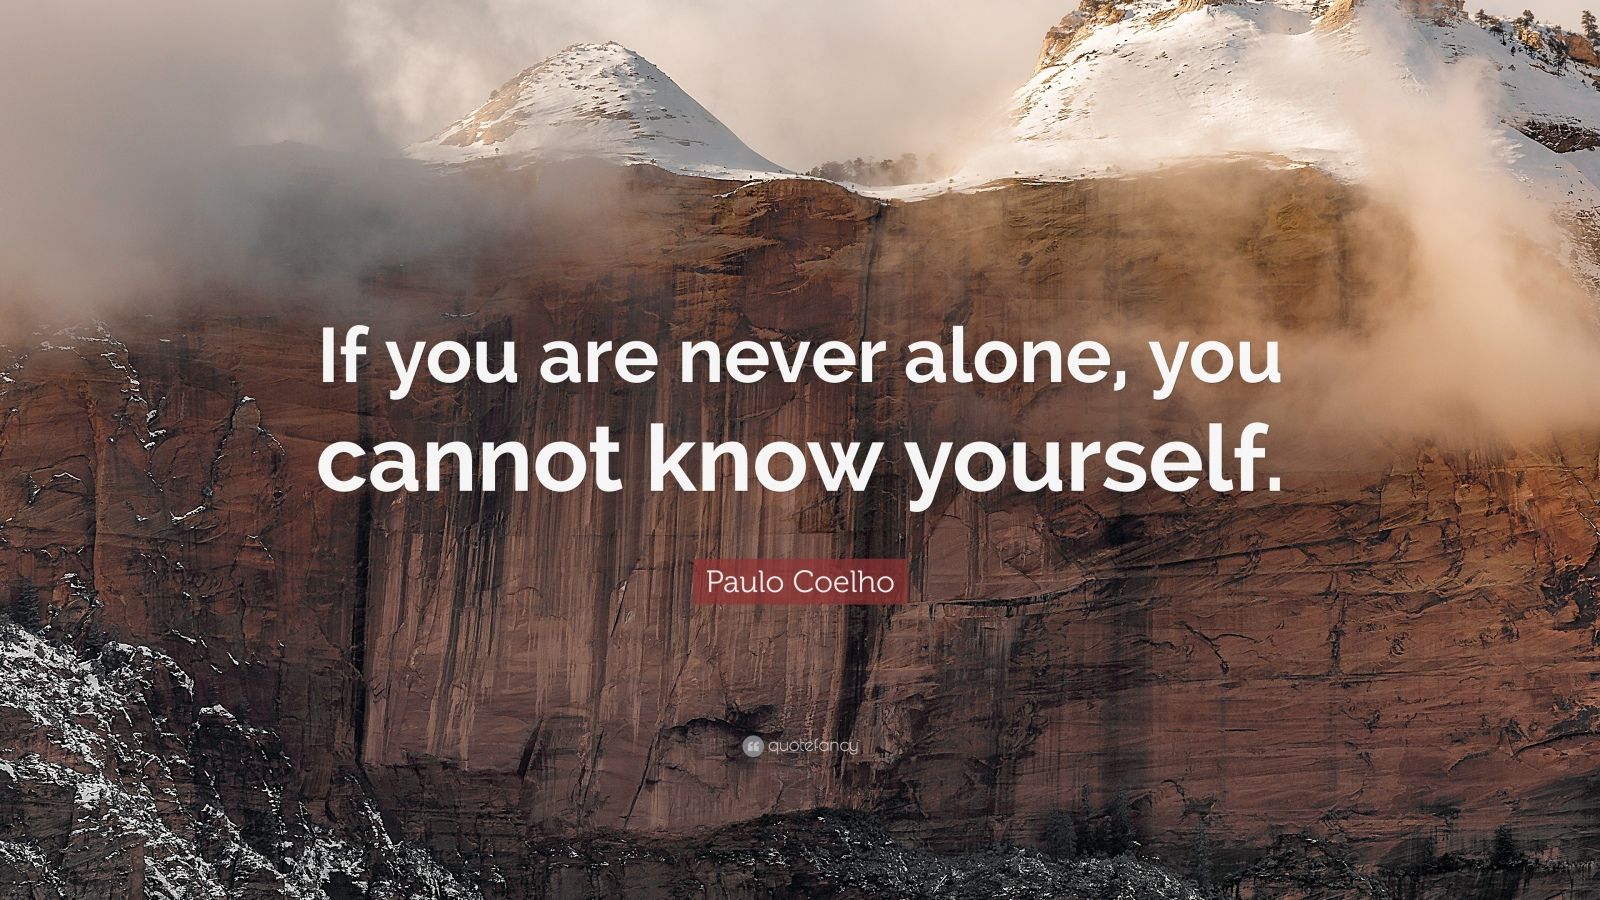 Paulo Coelho Quote: “If you are never alone, you cannot know yourself ...